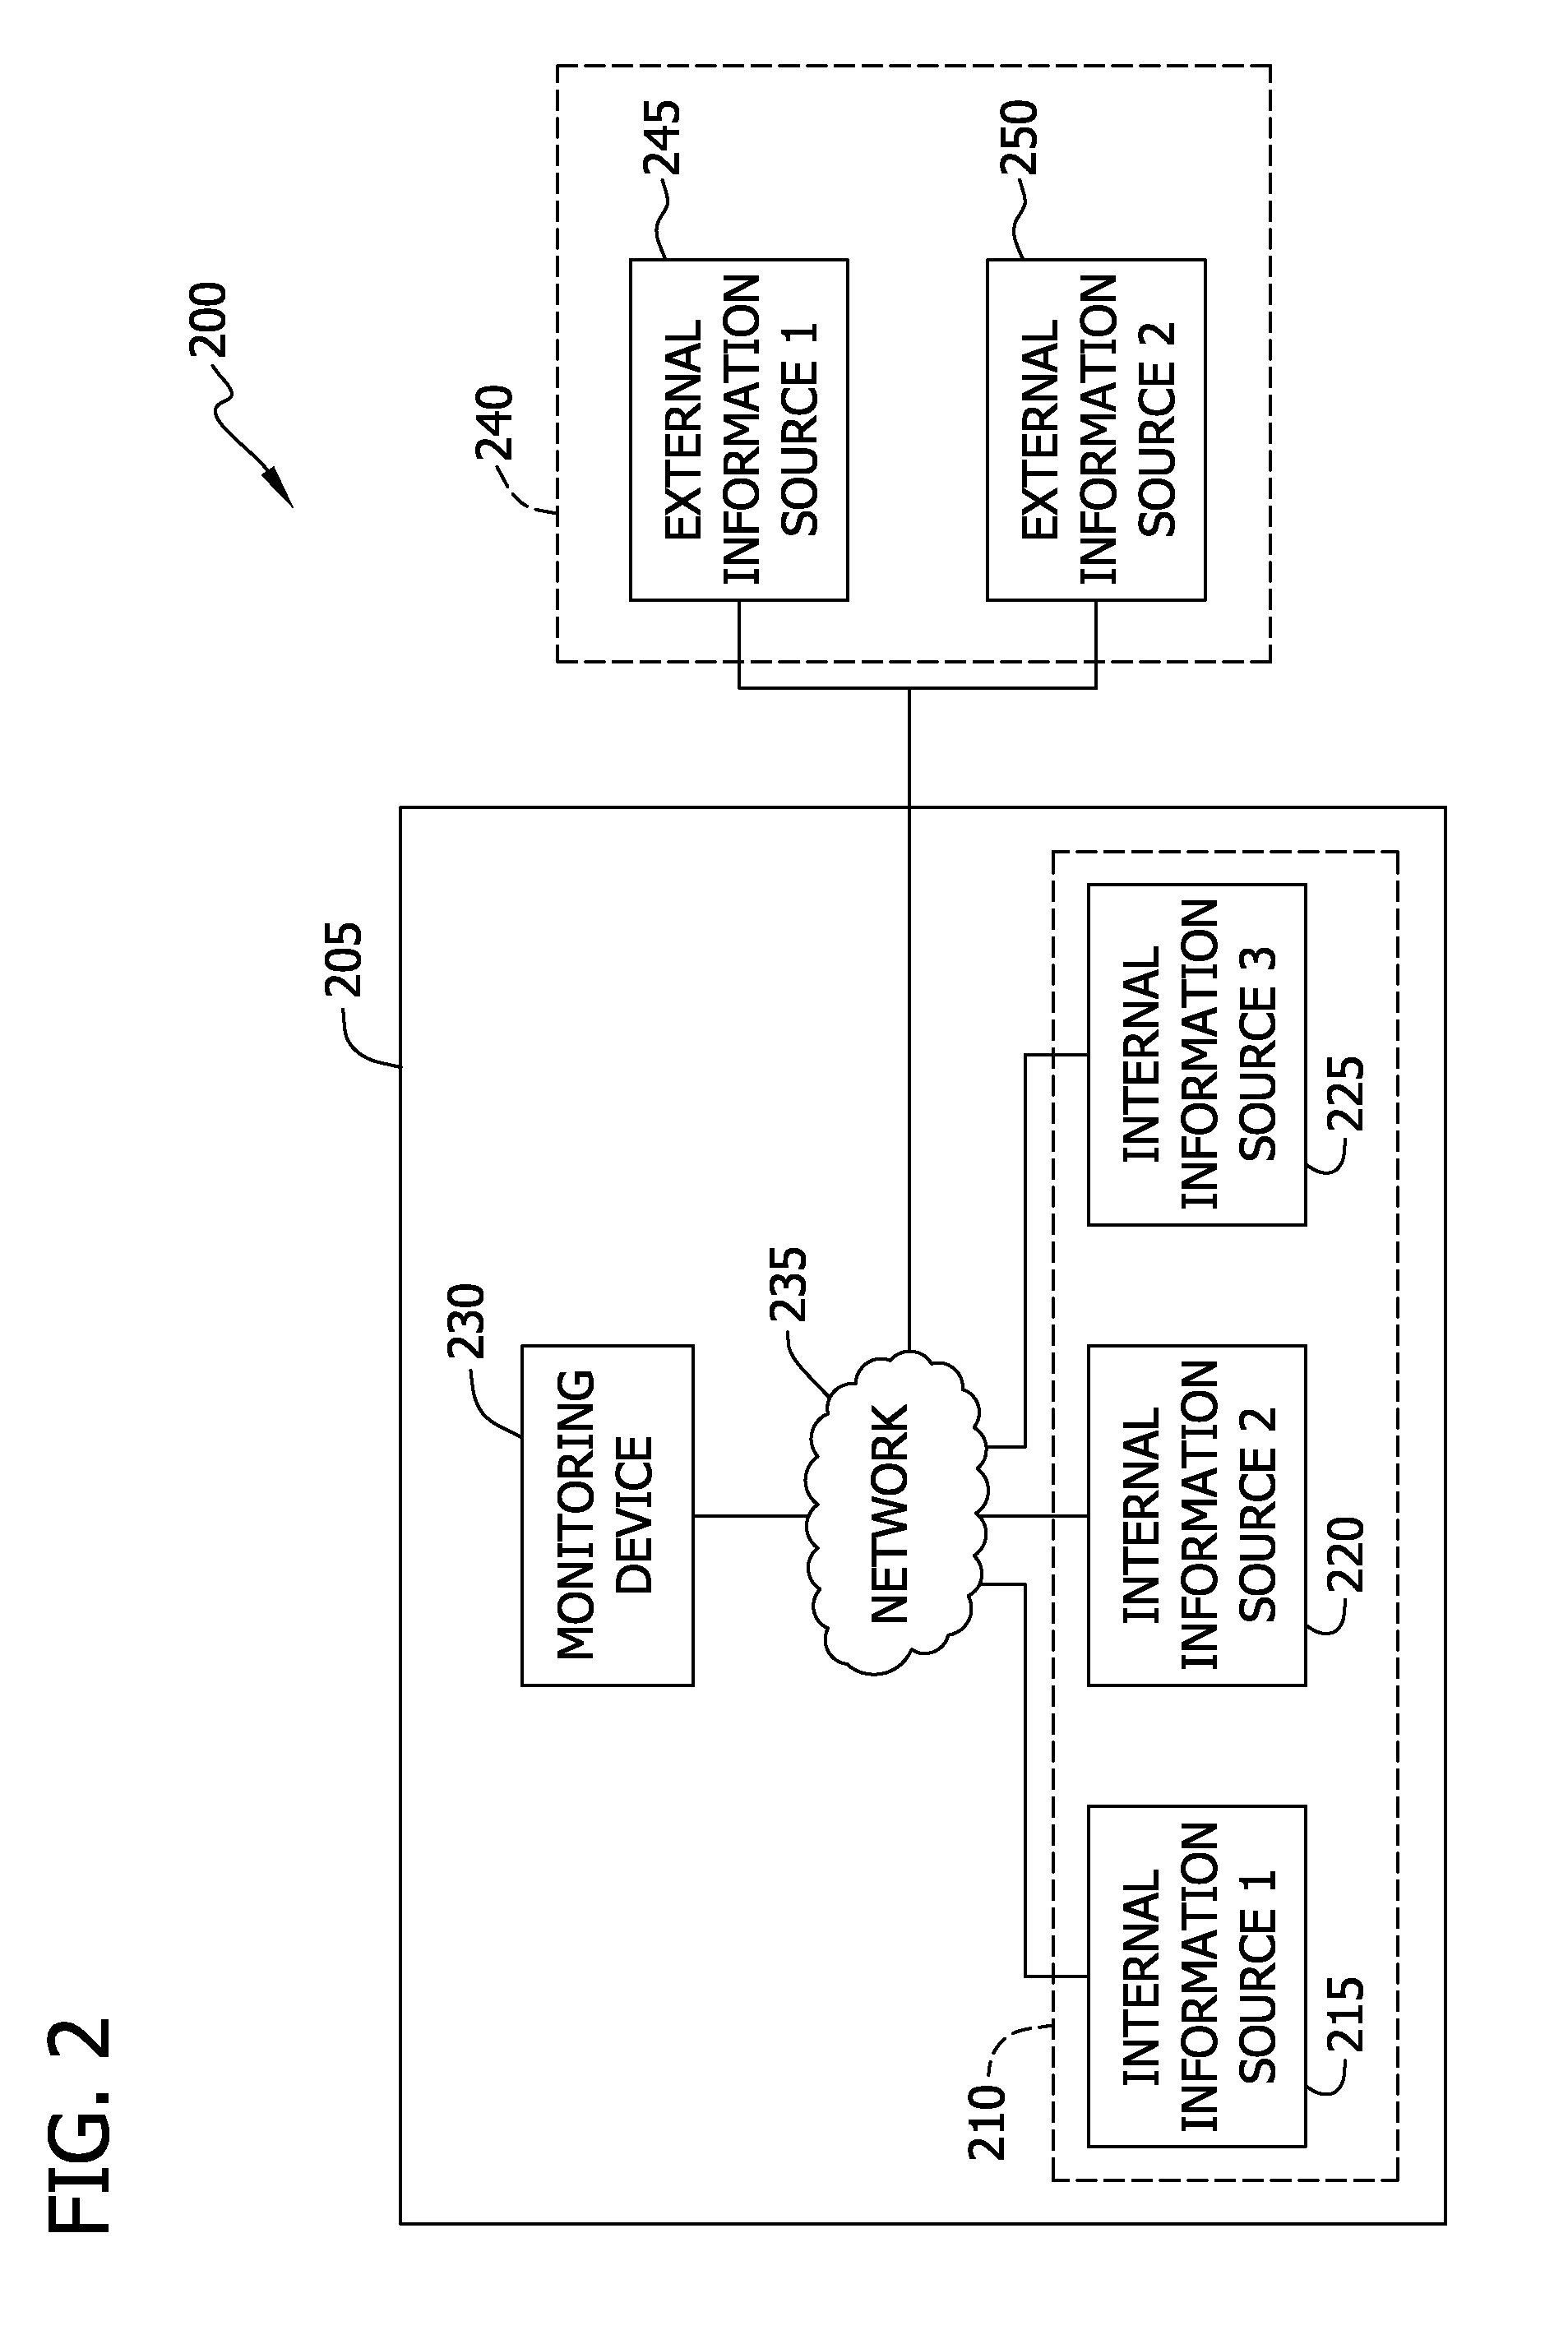 Methods and systems for use in identifying abnormal behavior in a control system